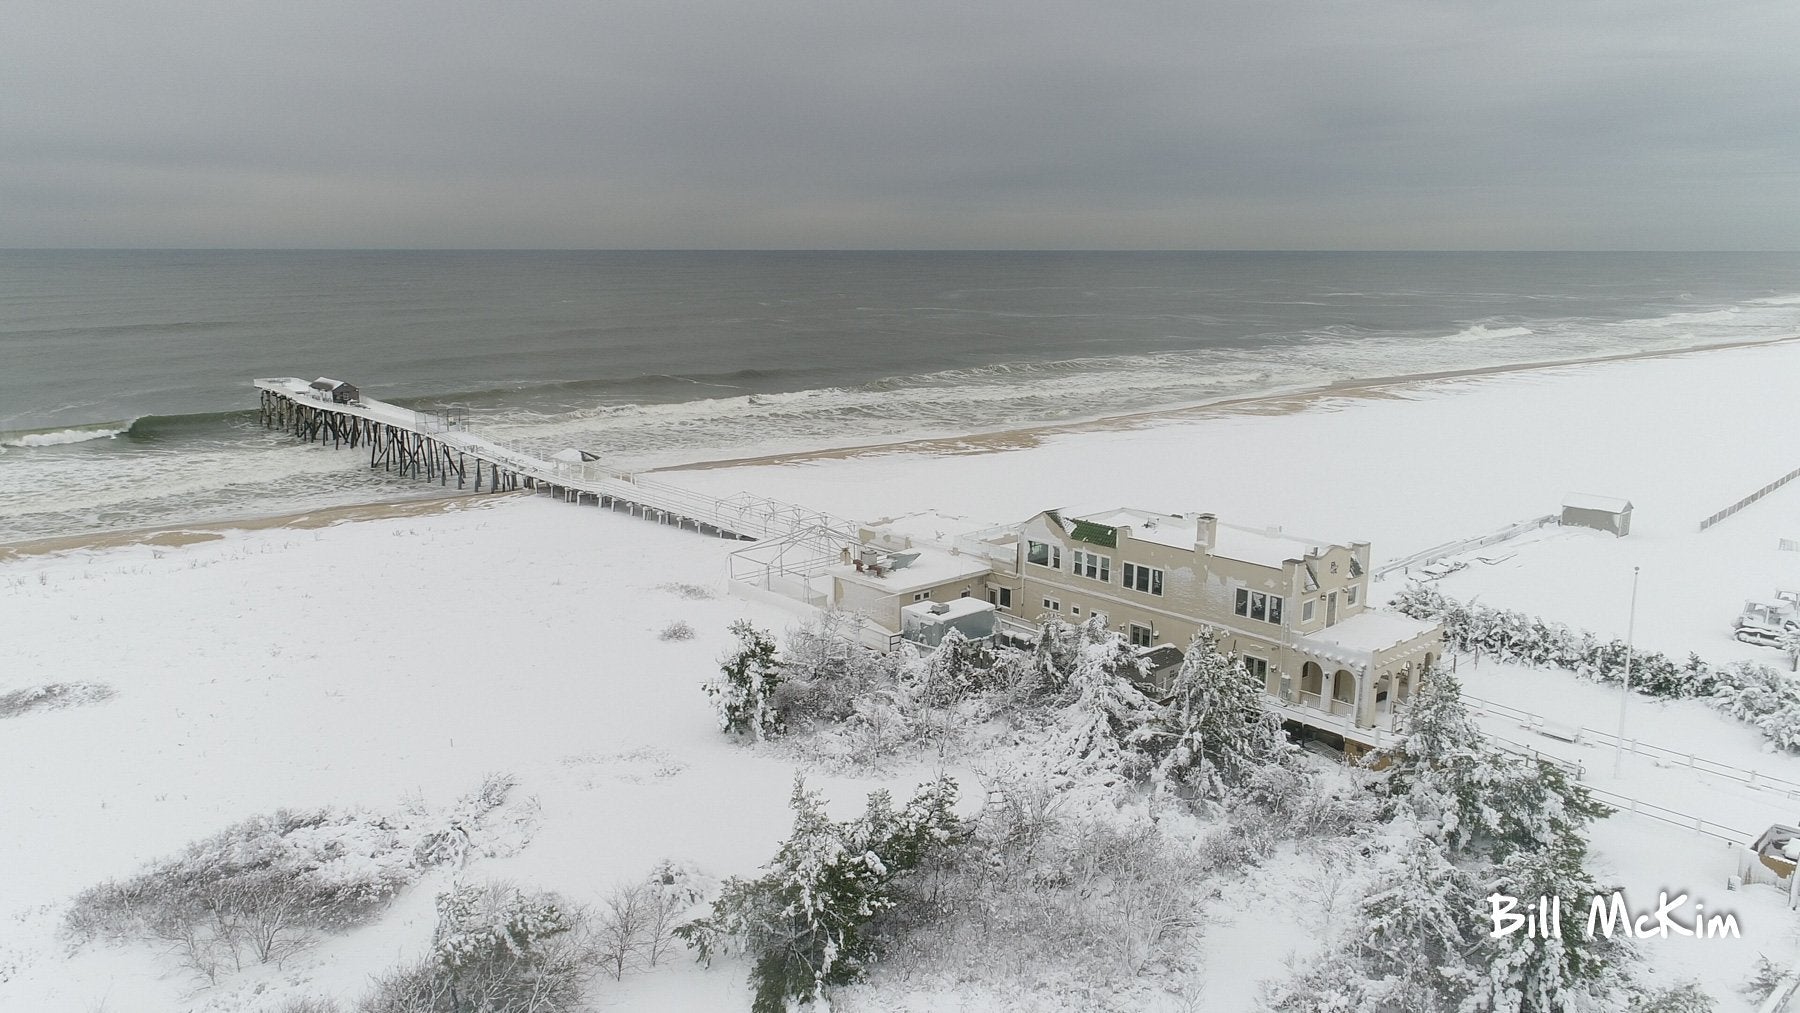 How about this snowy view of Belmar Beach